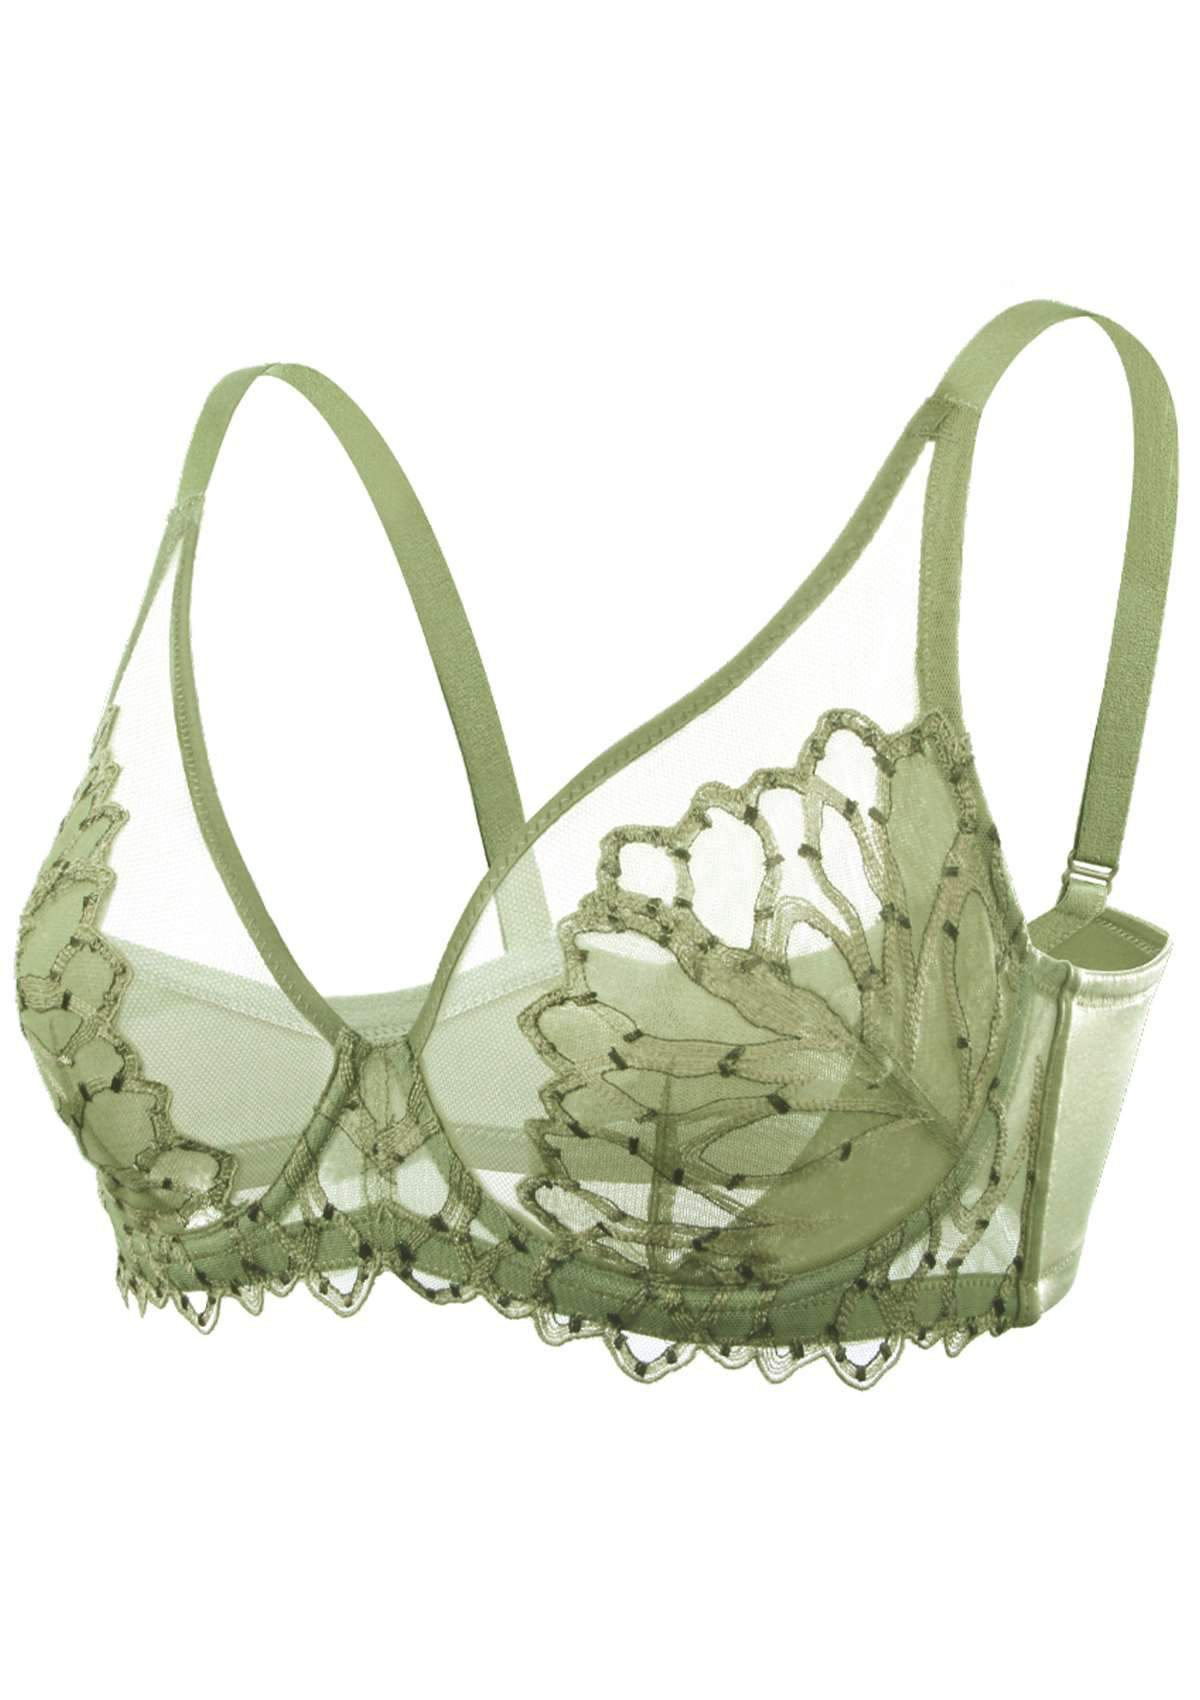 HSIA Chrysanthemum Floral Embroidered Bra: Lace Sheer Unpadded Bra - Green / 32 / D